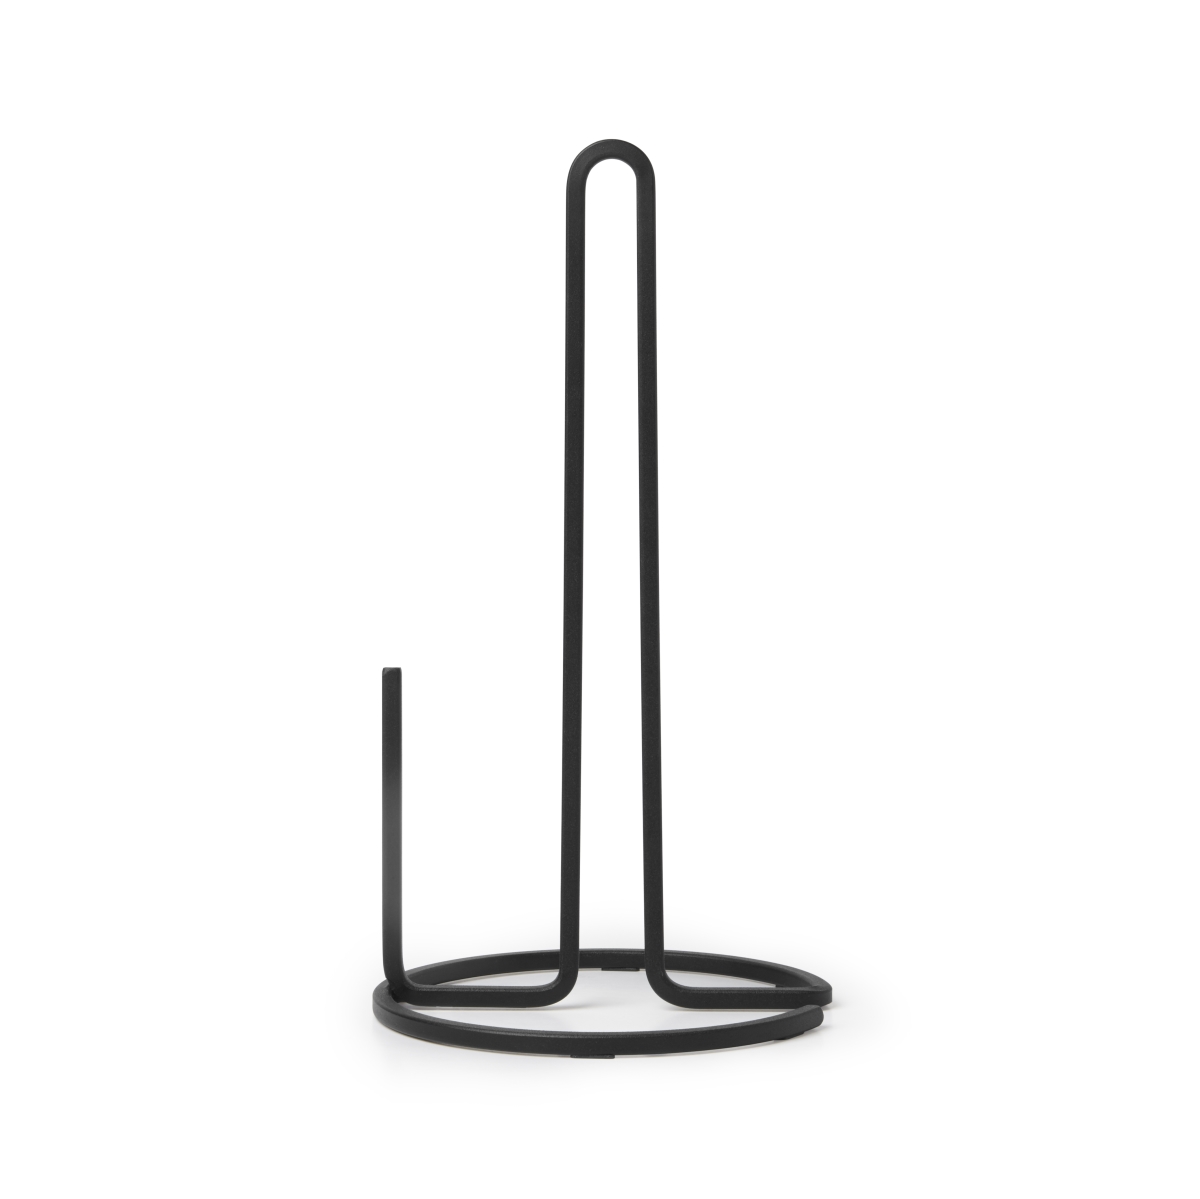 1004313-040 Squire Paper Towel Holder For Kitchen, Bent Metal Wire Looks Like Cast Iron - Black